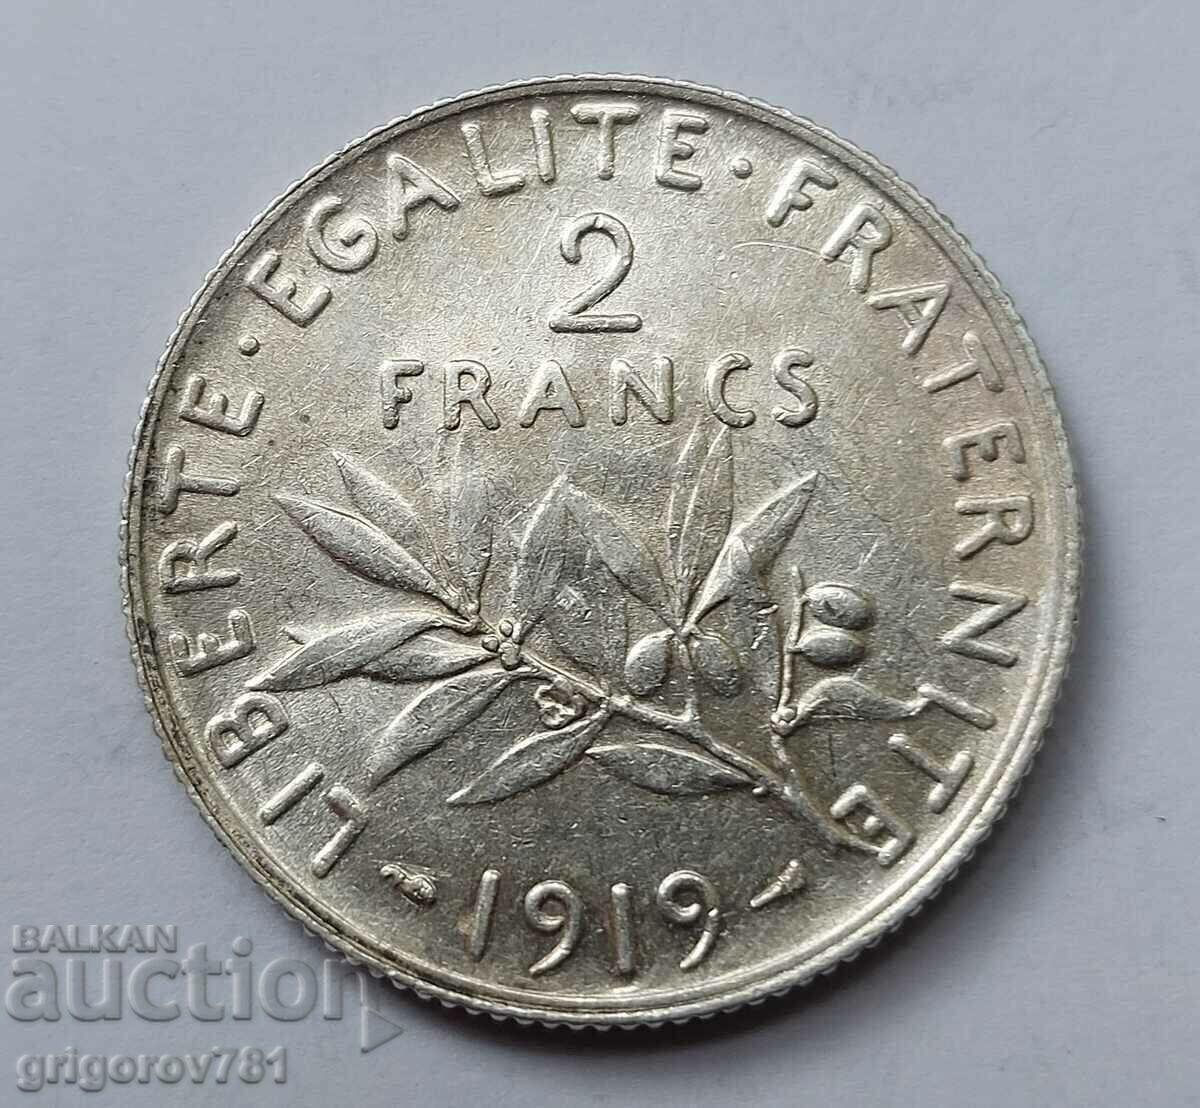 2 Francs Silver France 1919 - Silver Coin #91